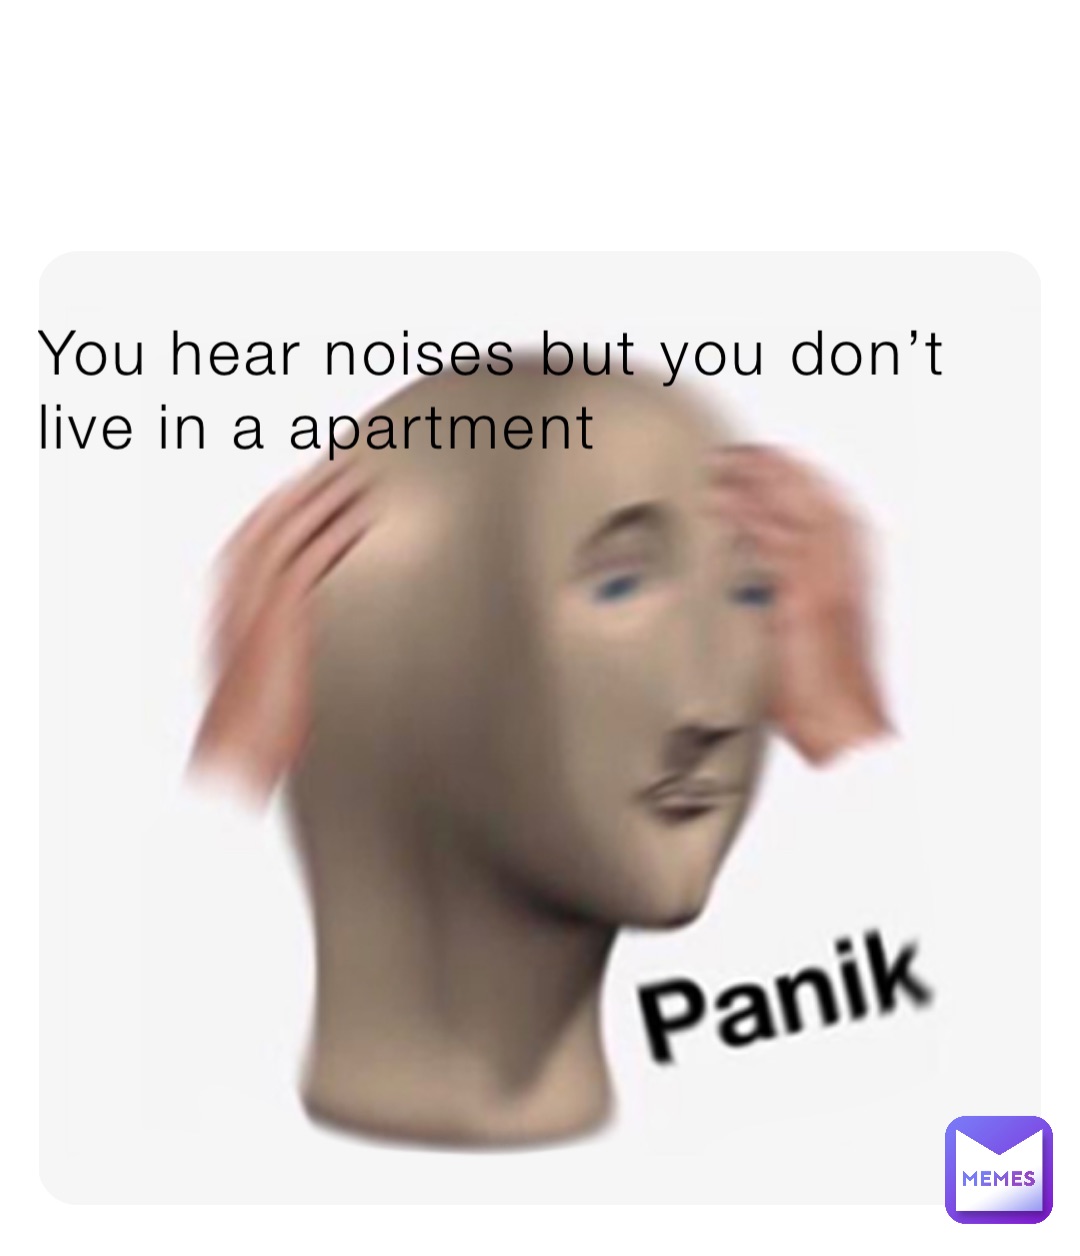 You hear noises but you don’t live in a apartment